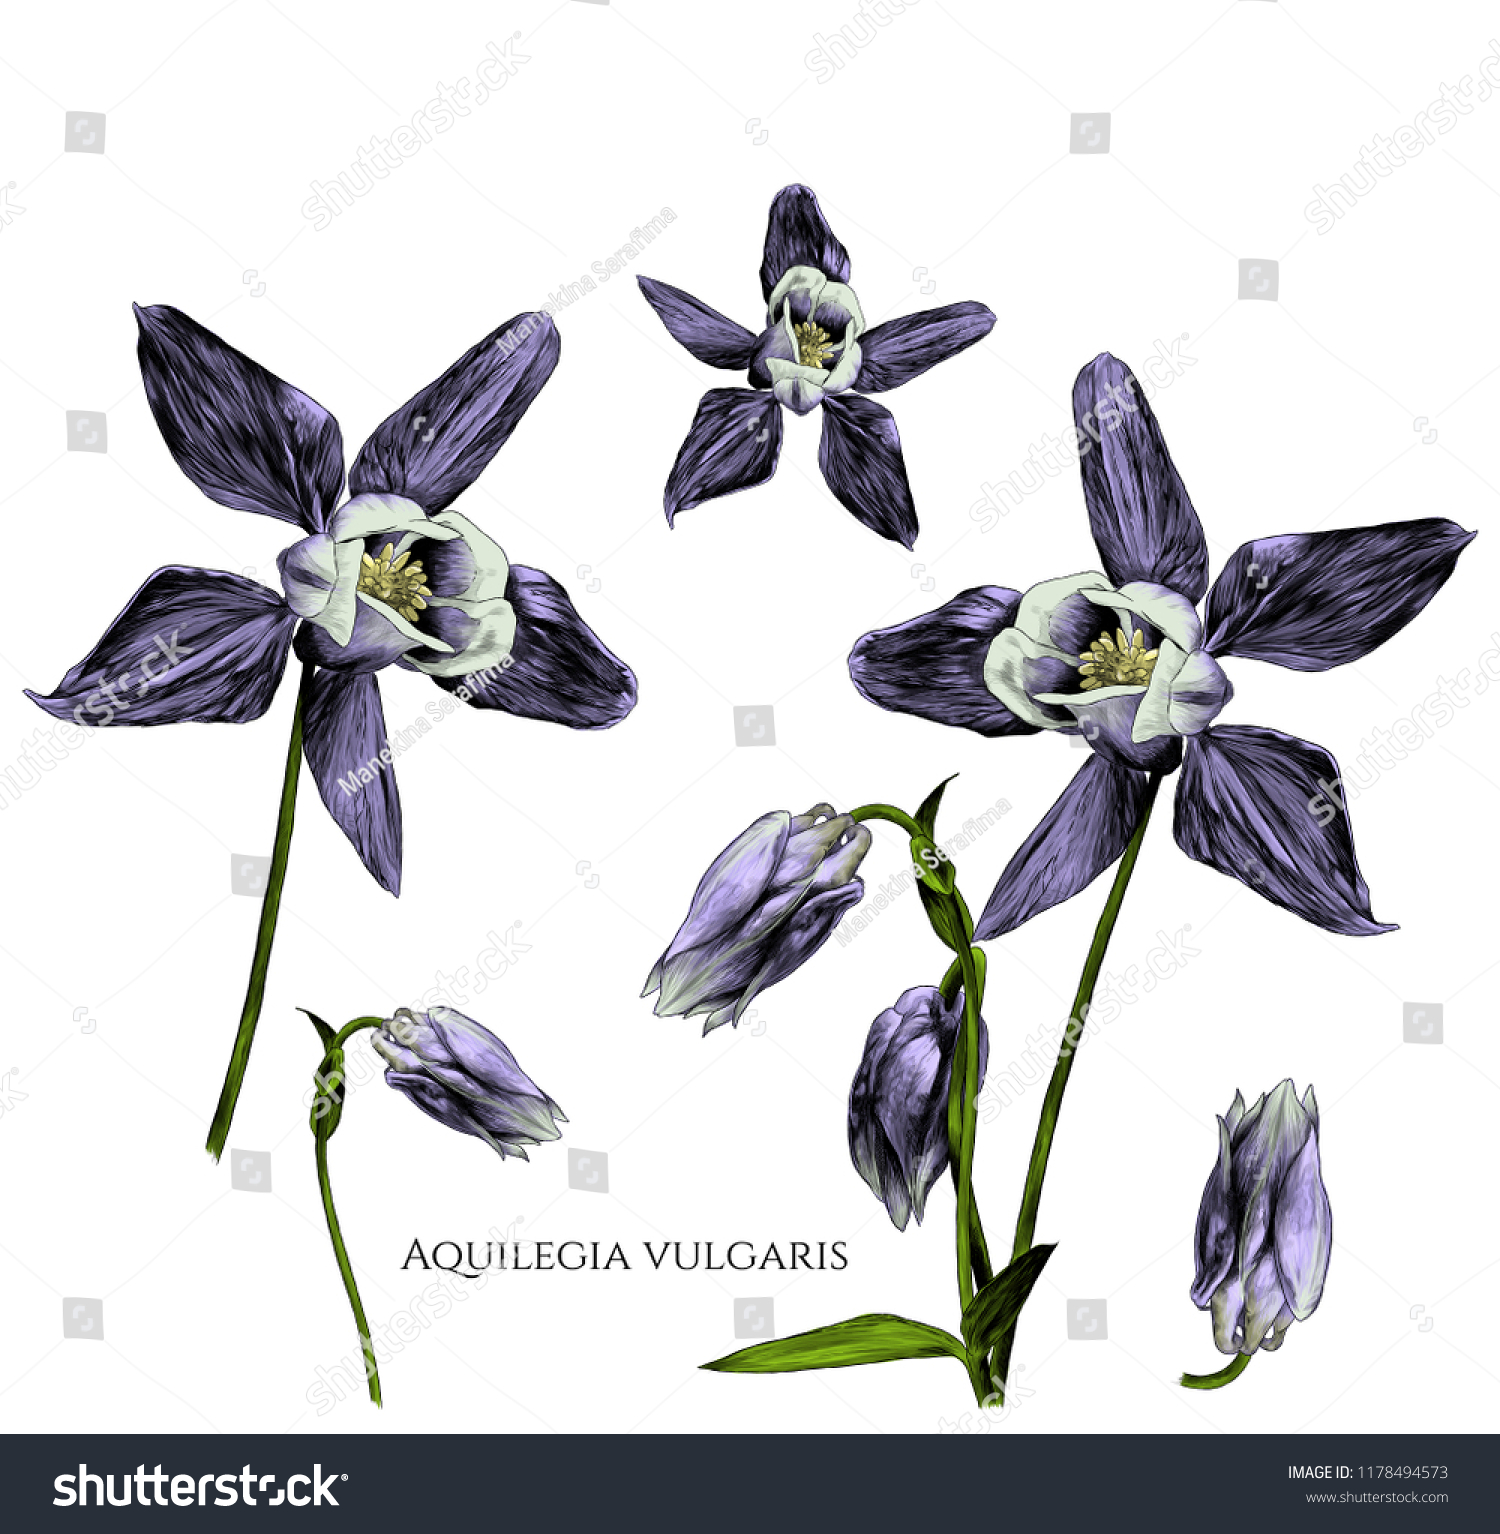 set of aquilegia vulgaris flowers with blossomed buds and not yet blossomed, branches with leaves, sketch vector graphics color illustration on white background #1178494573